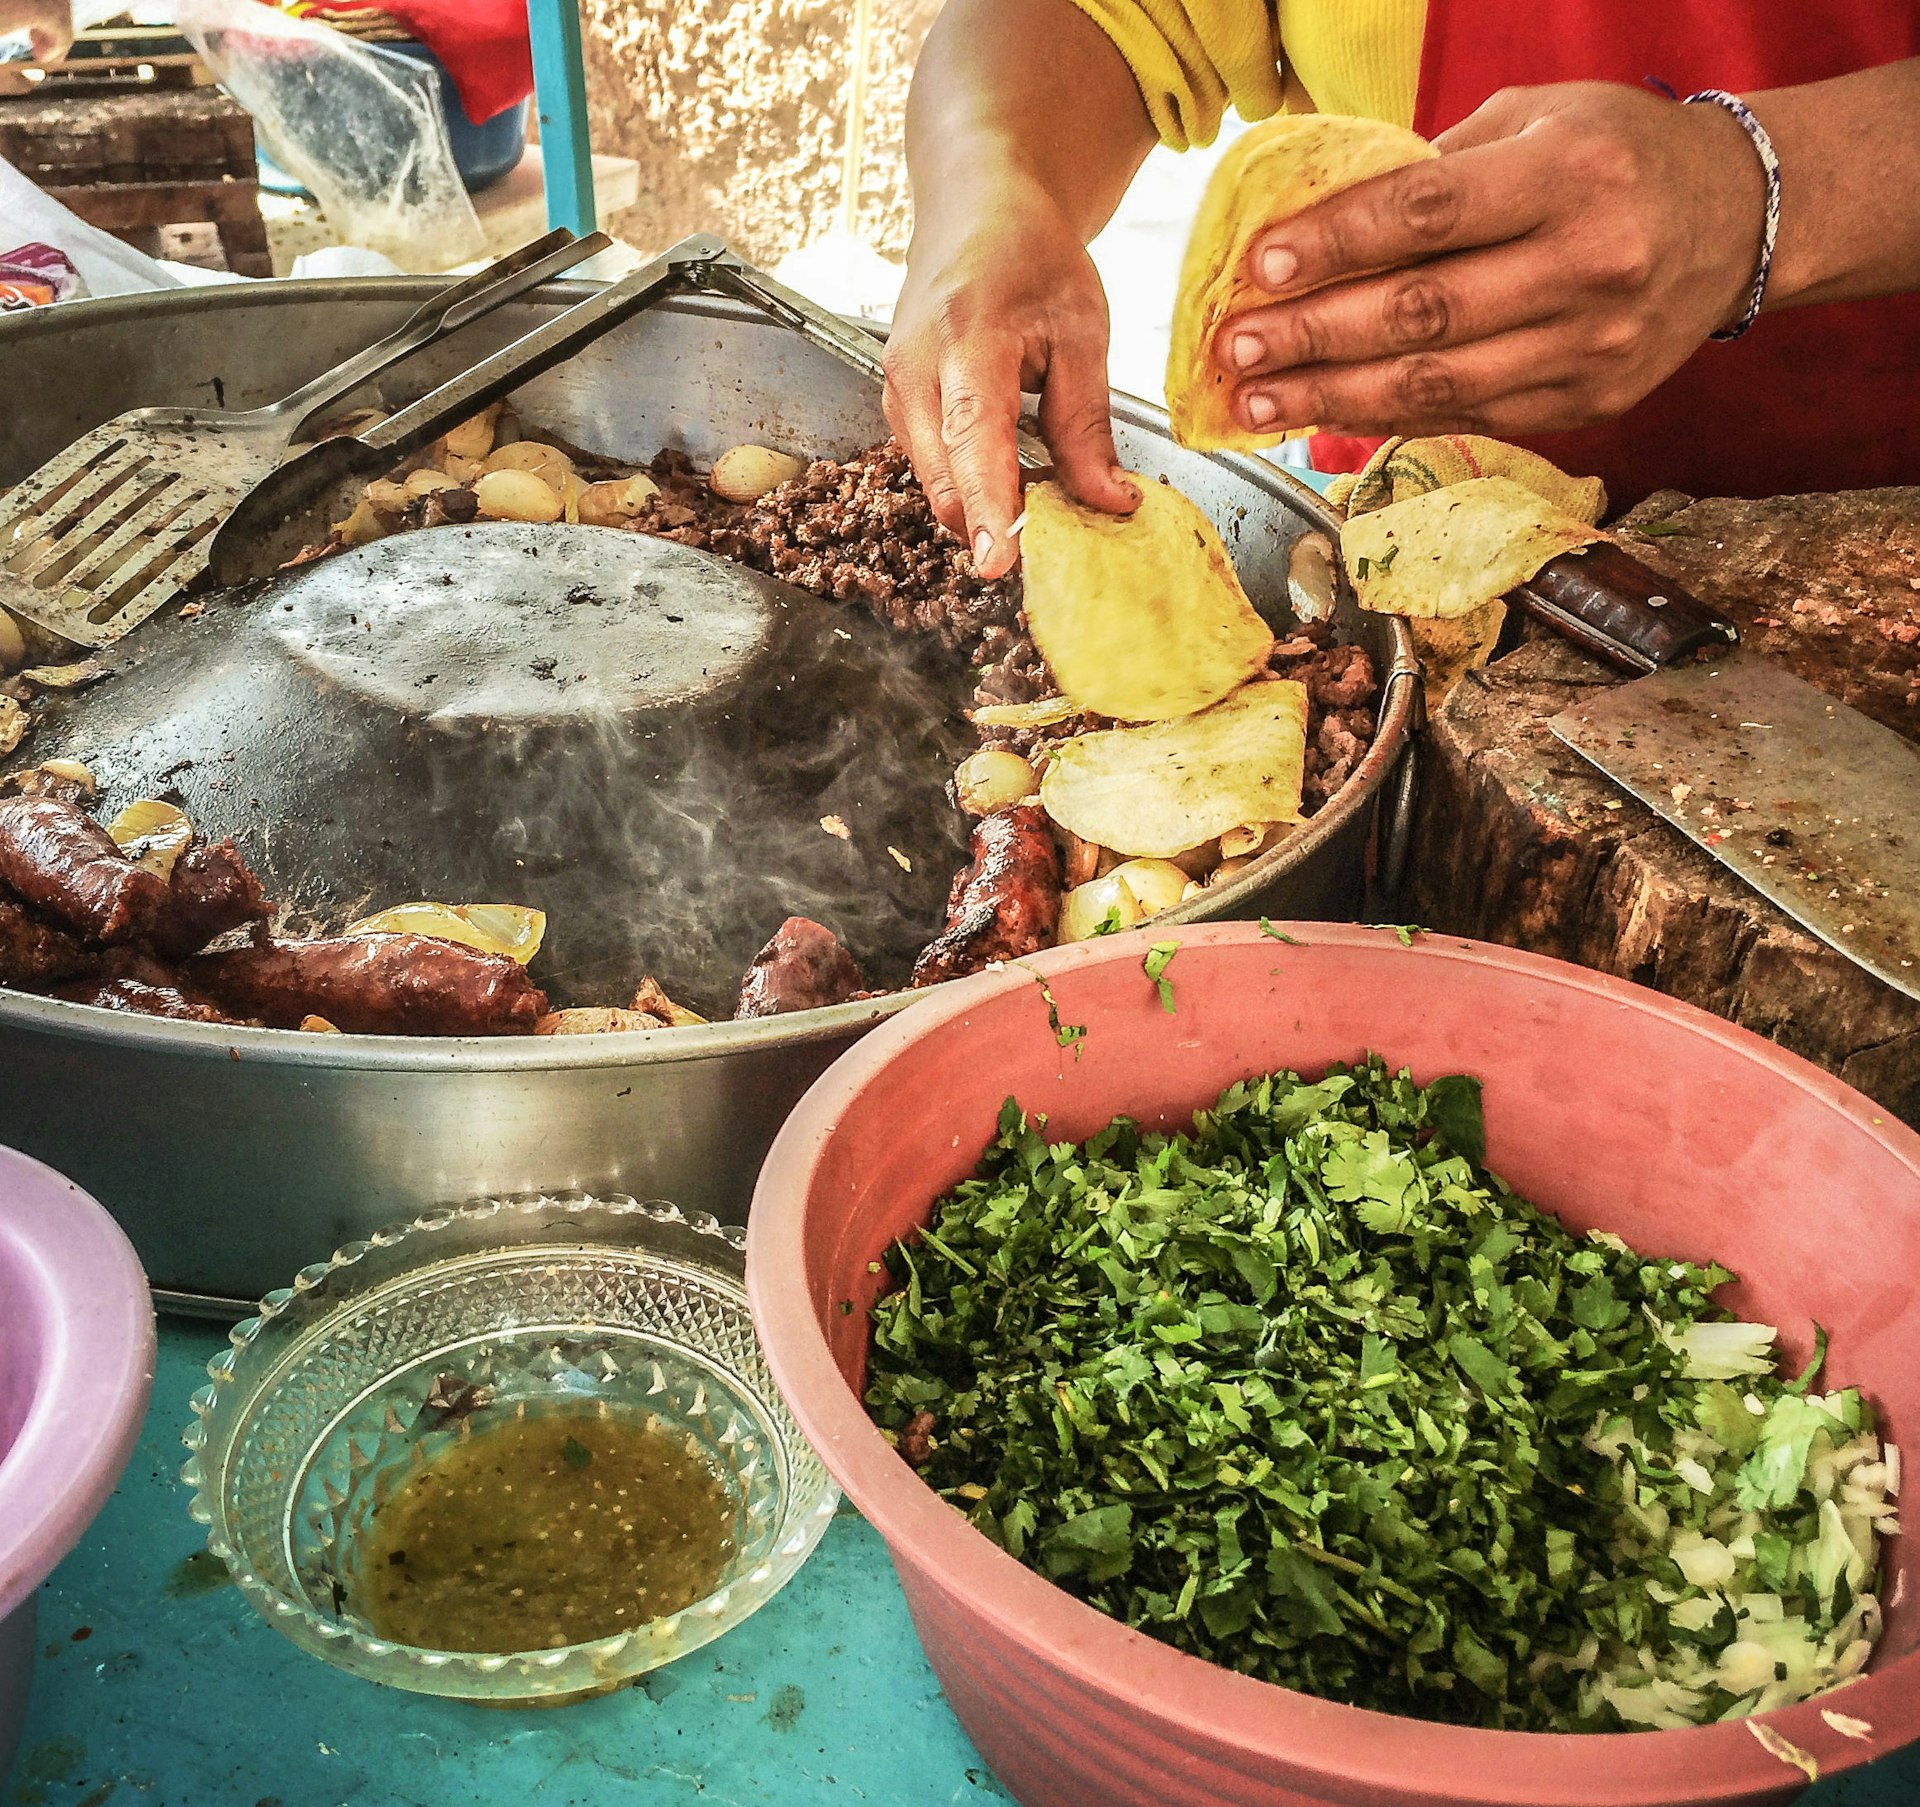 Hands of a Street vendor preparing food for Day of the Dead celebrations, Mexico